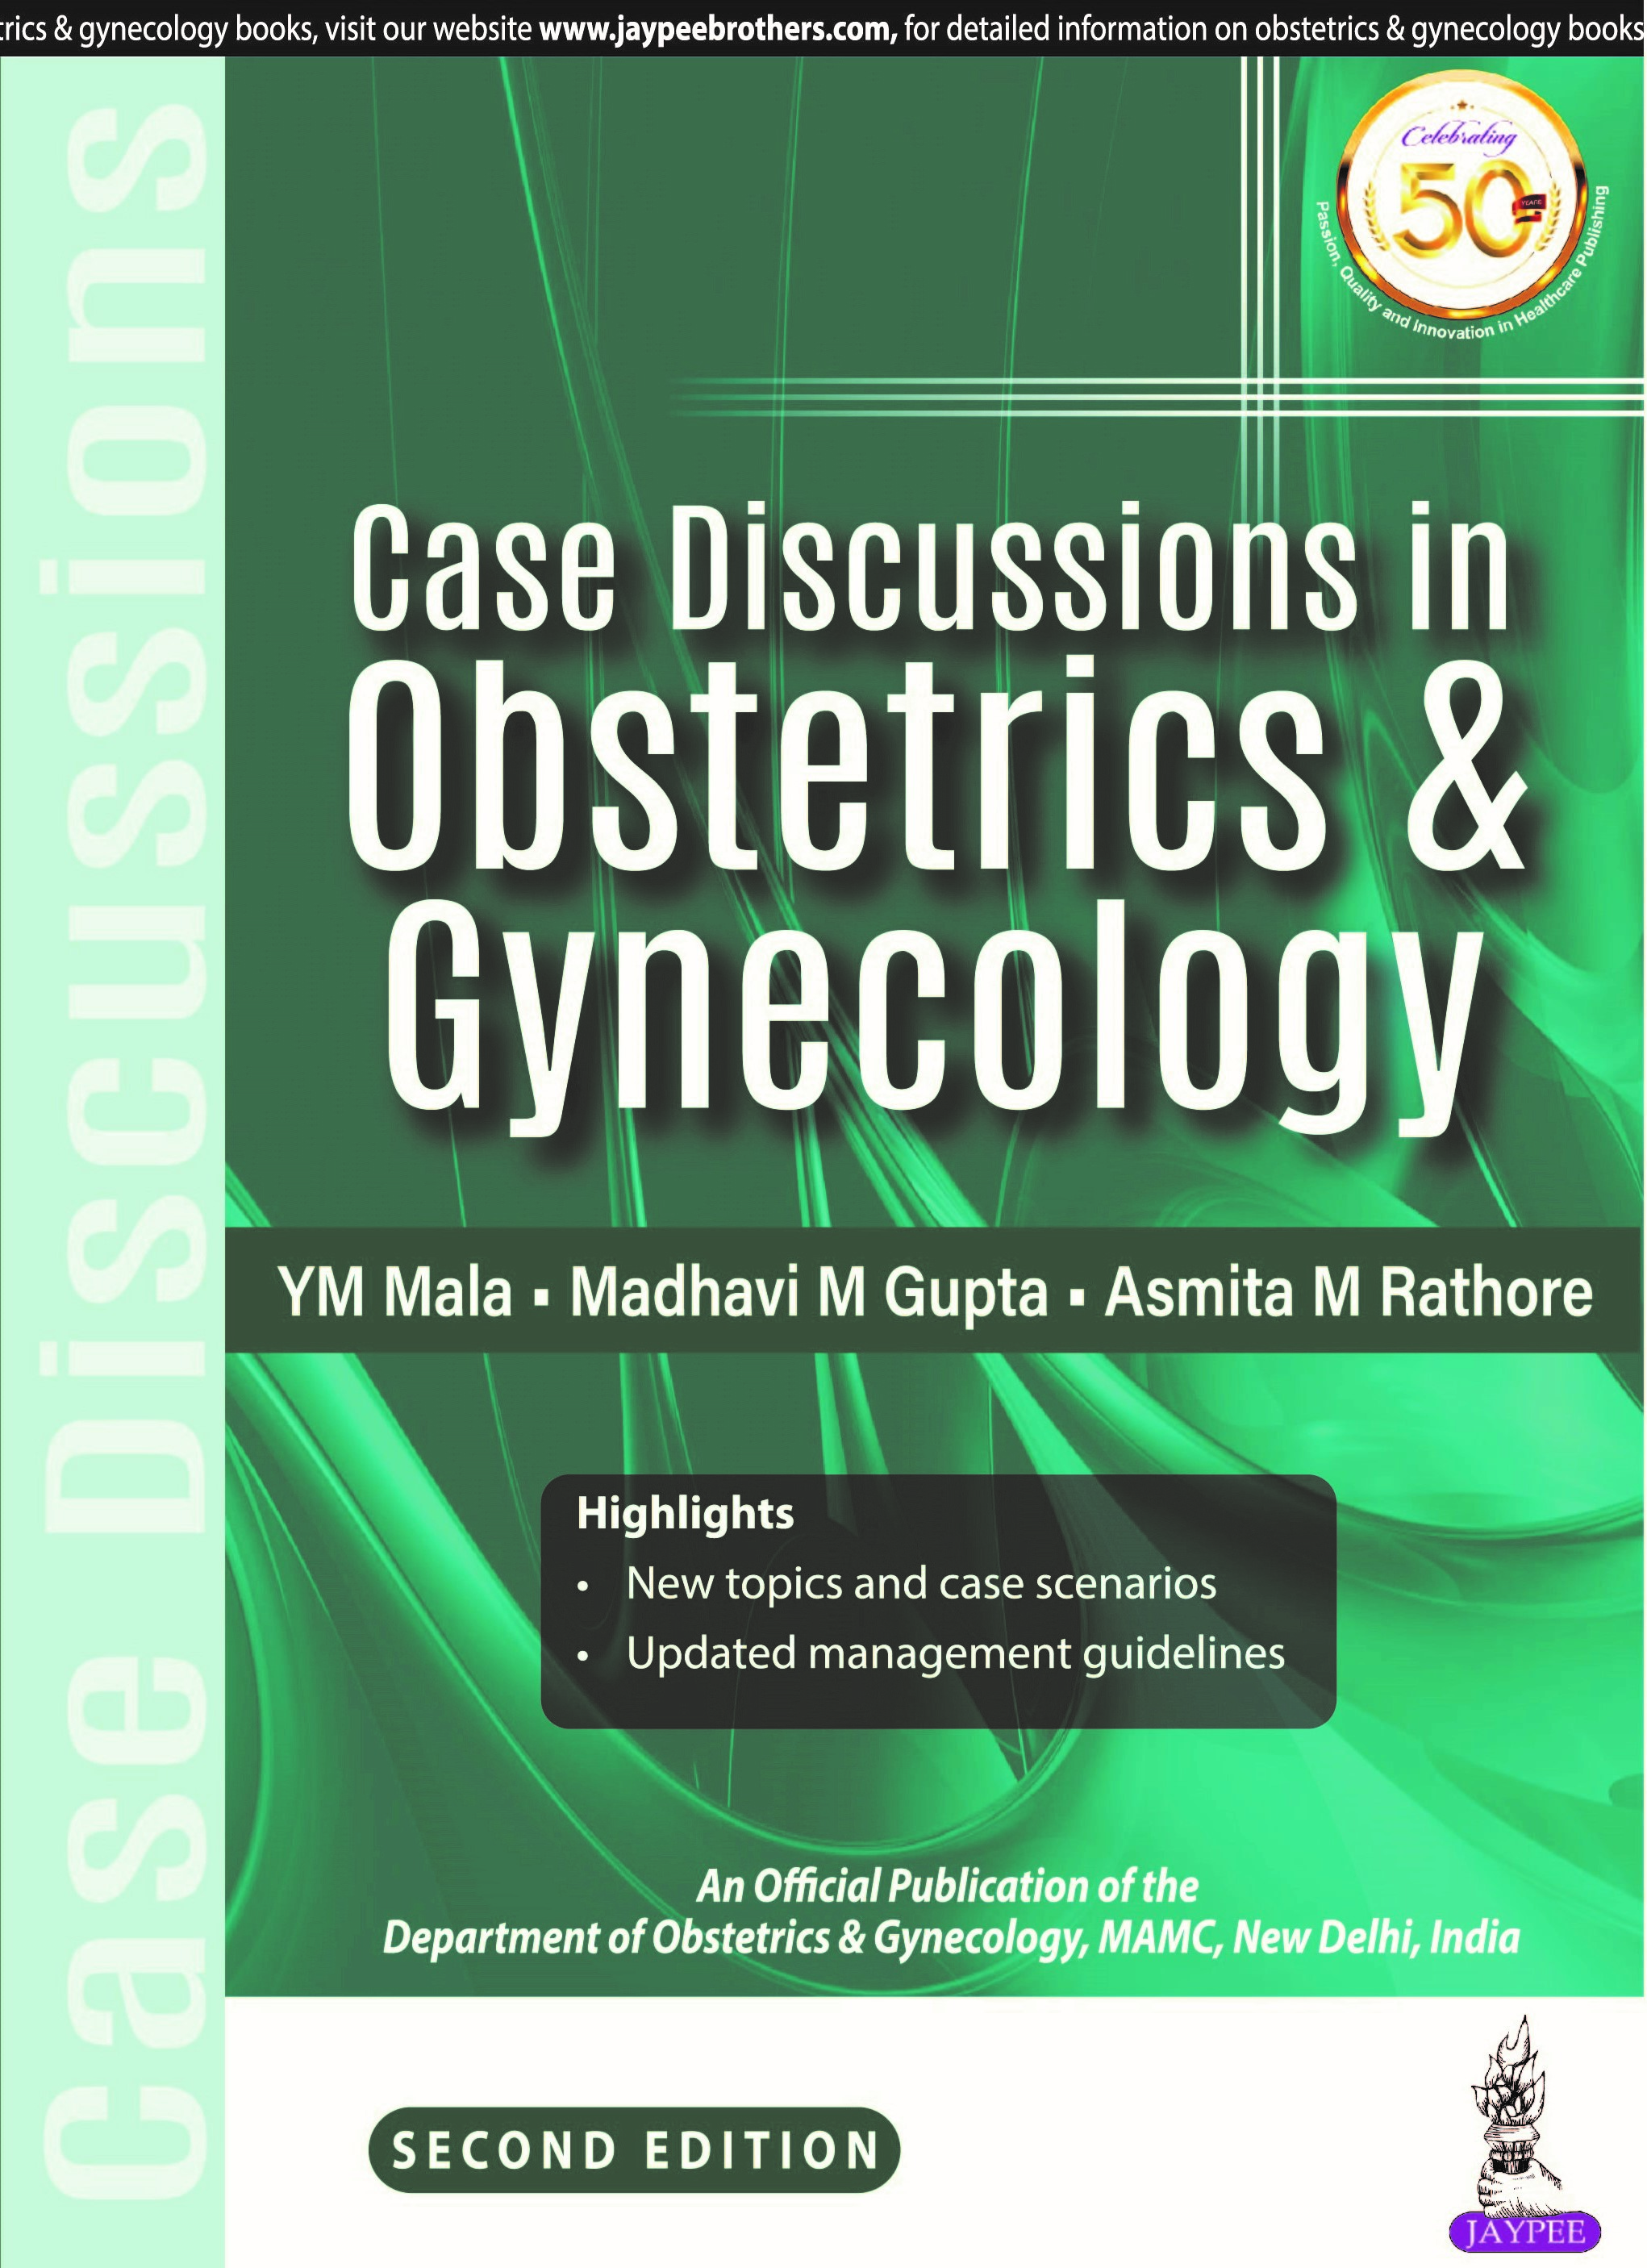 case study discussion gynecologic health